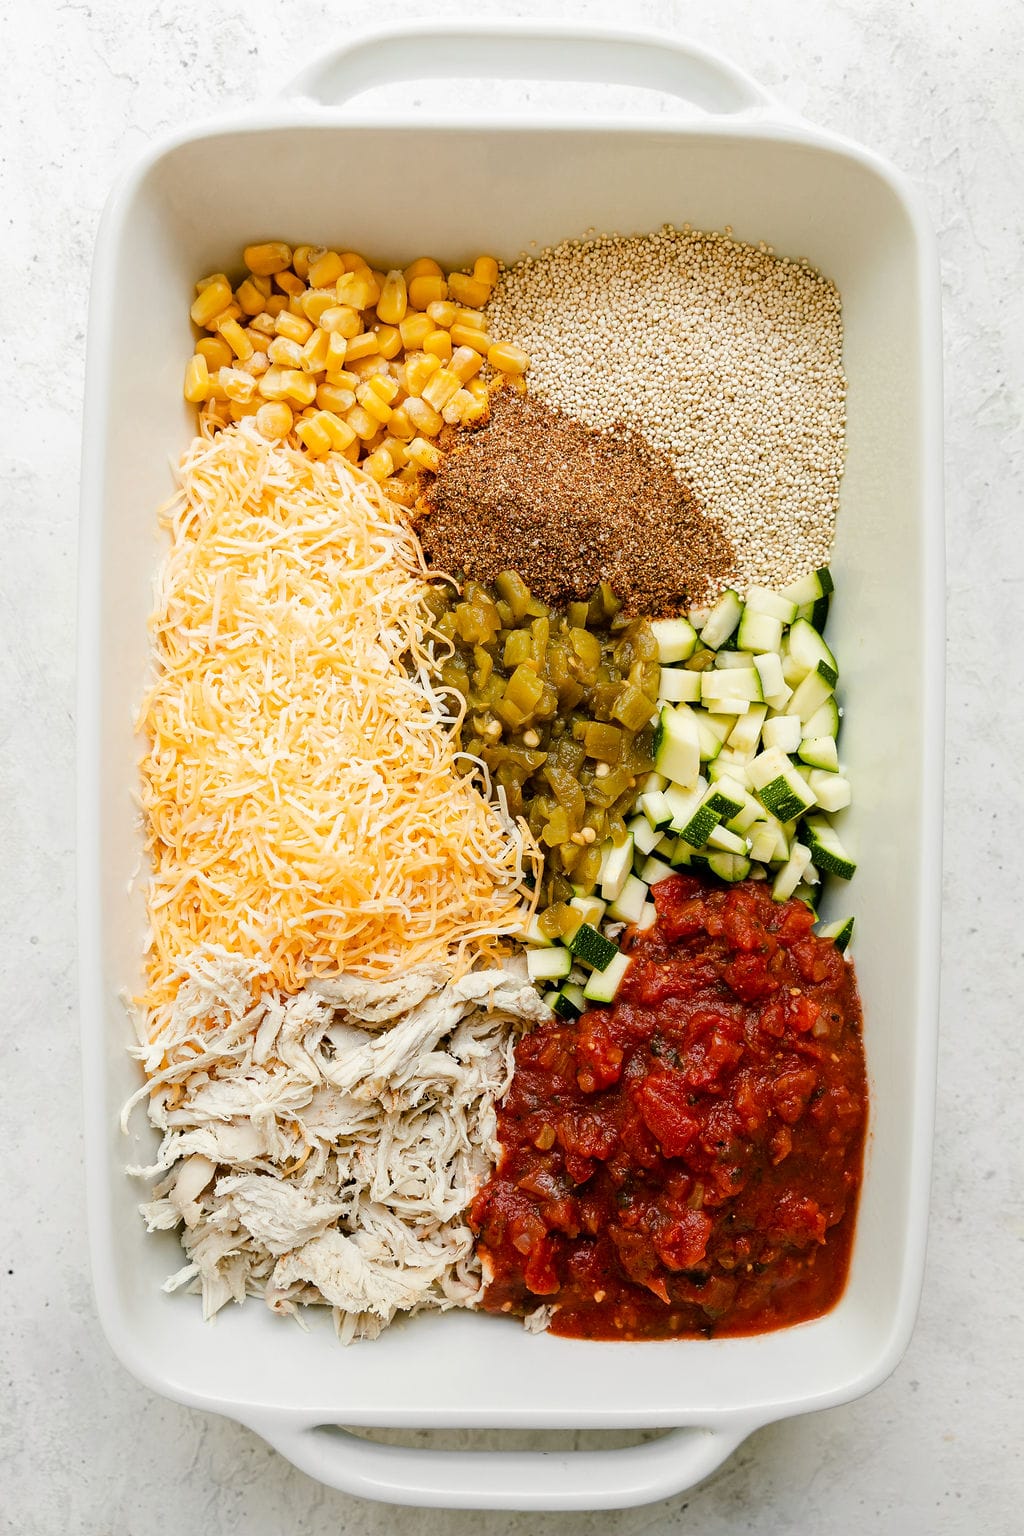 All ingredients for chipotle quinoa casserole in a white baking dish ready to stir together.